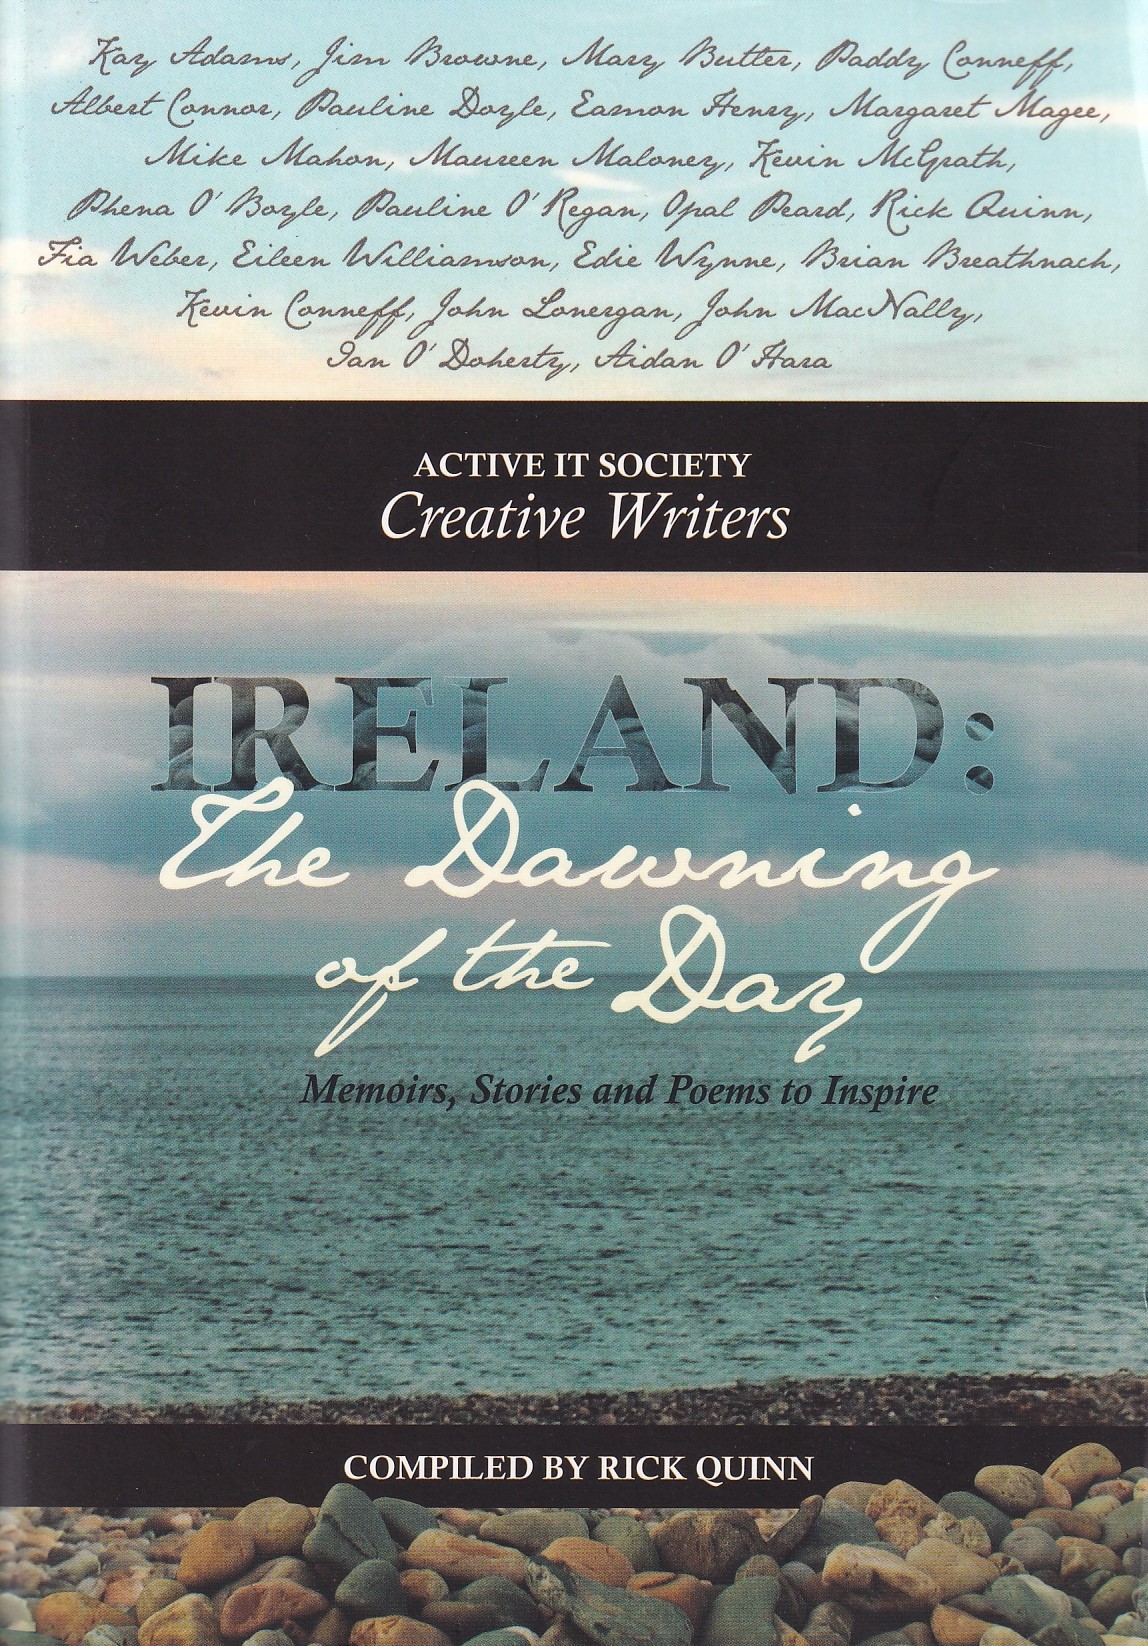 Ireland: The Dawning of the Day: Memoirs, Stories and Poems to Inspire | Active IT Society Creative Writers | Charlie Byrne's